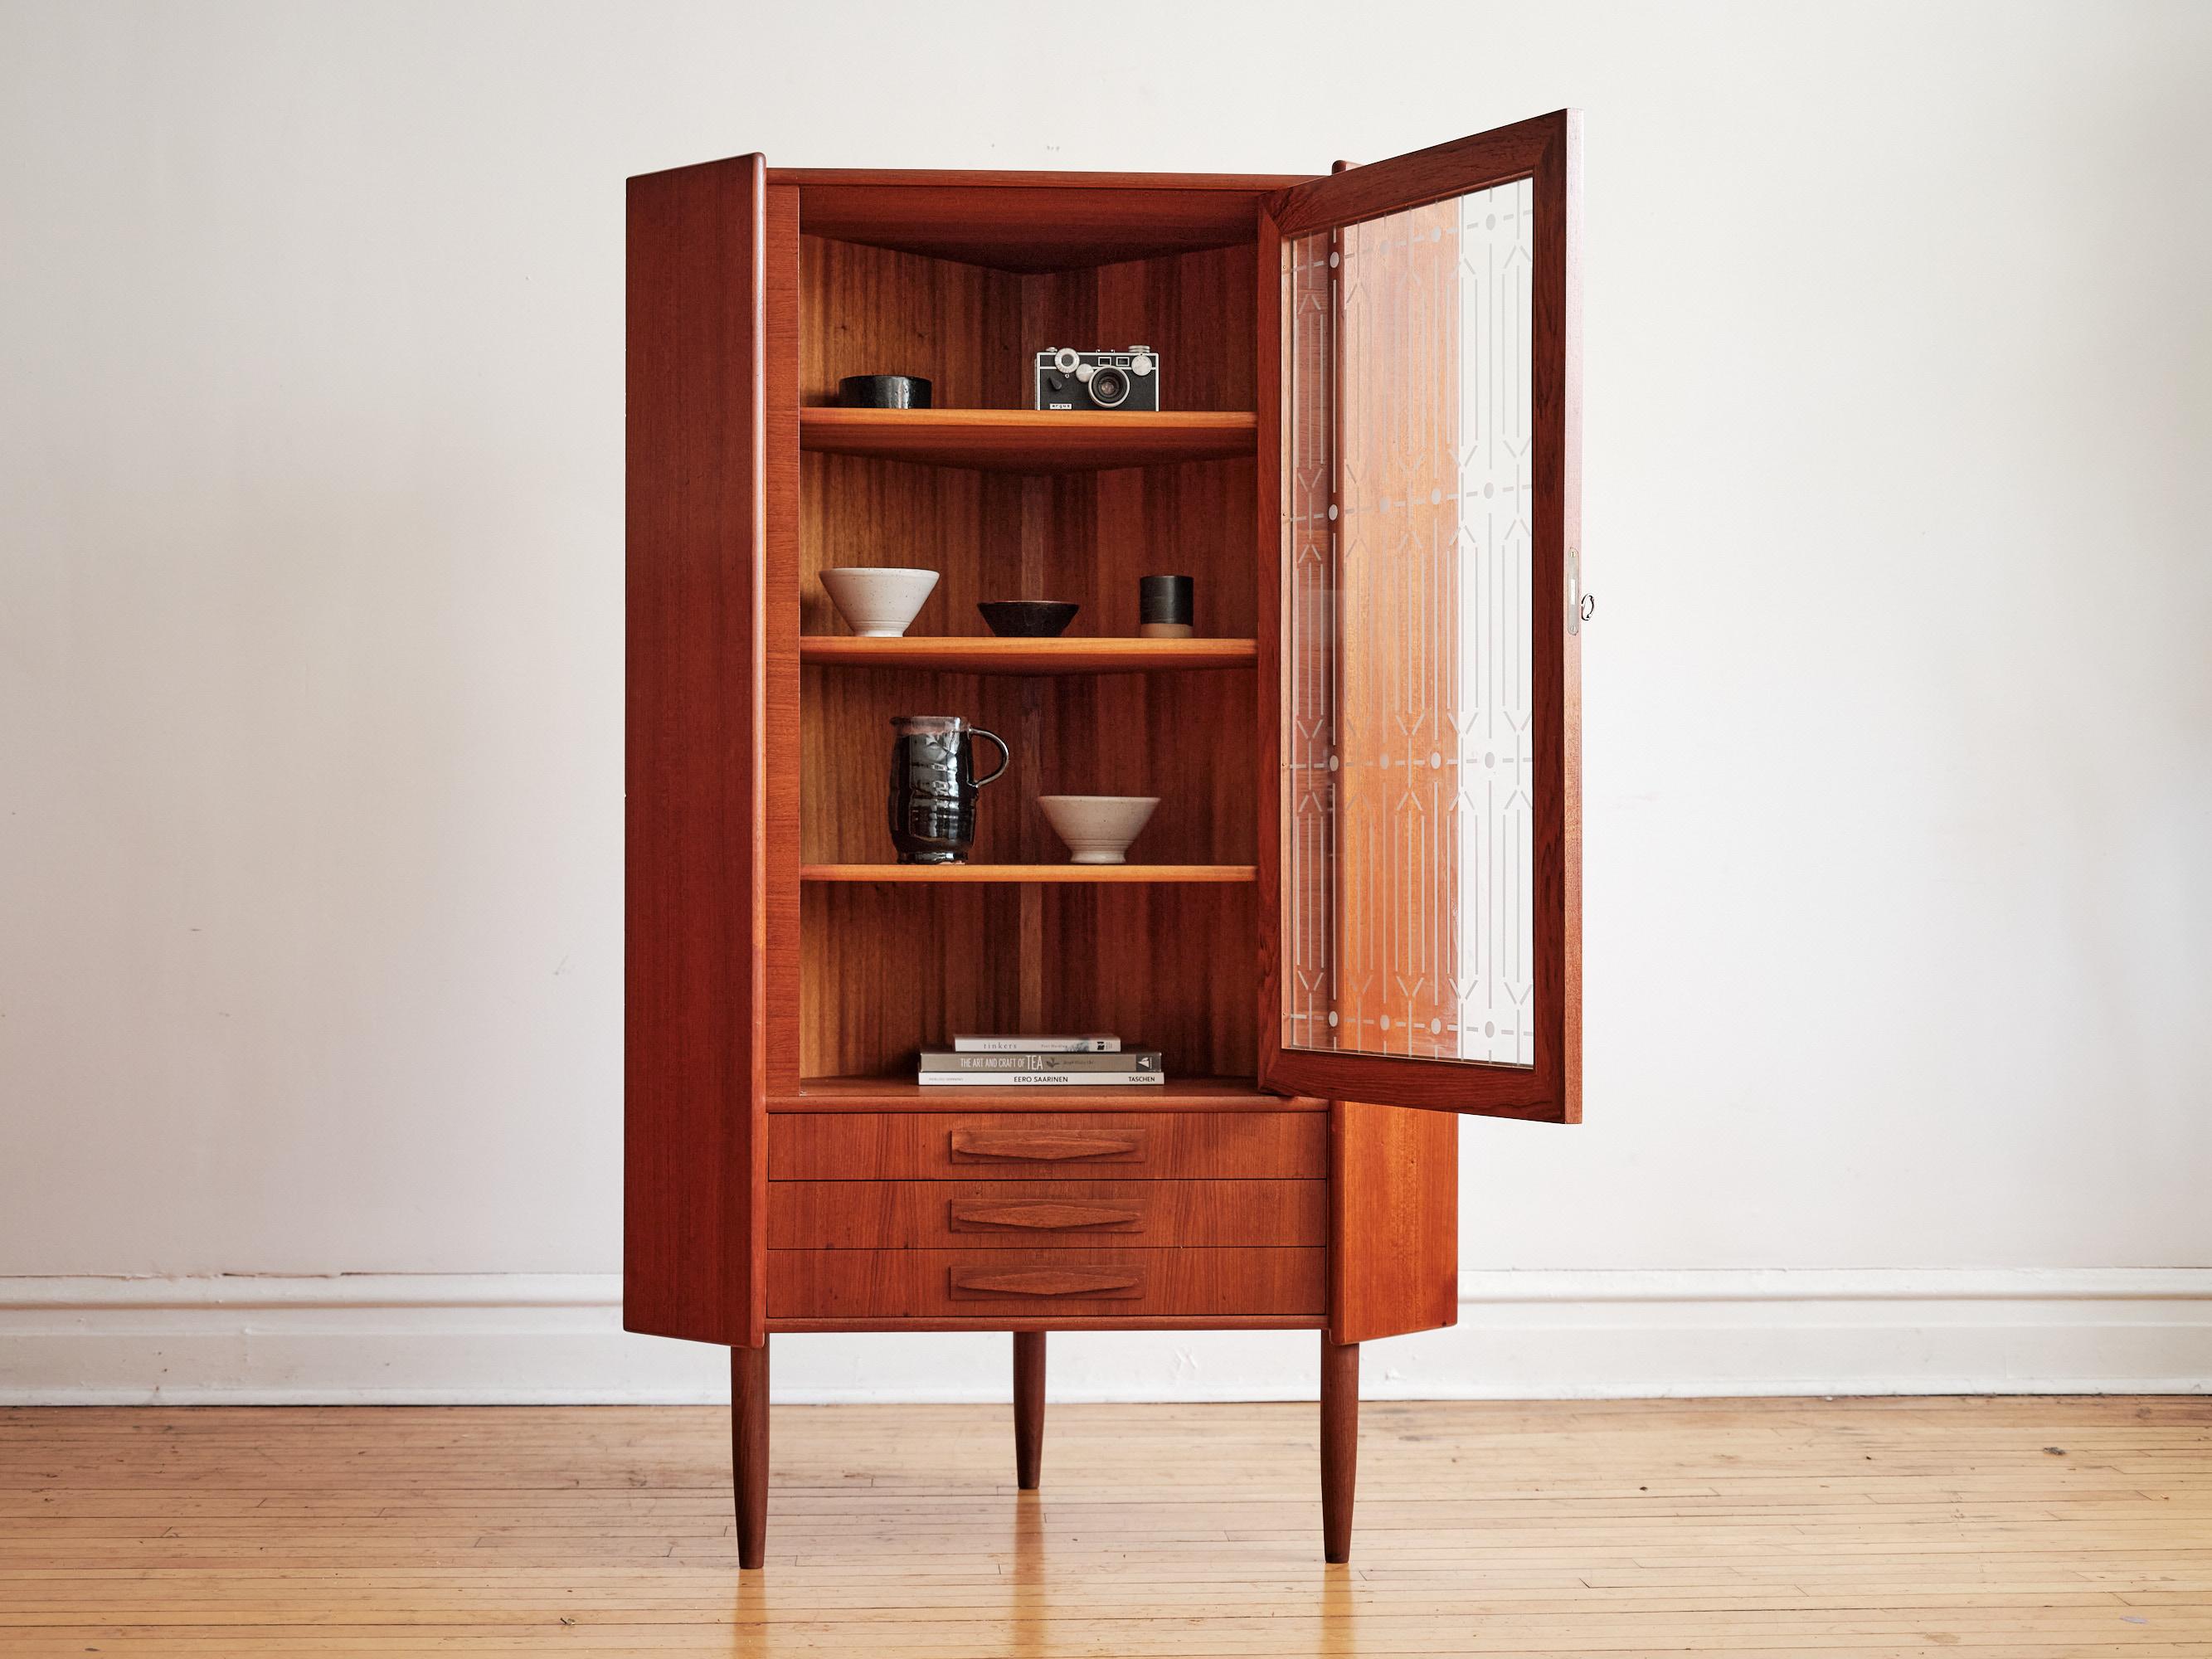 Danish Mid-Century Modern locking teakwood corner cabinet.
Just imported from Denmark!
Locking cabinet with etched glass.
Includes vintage key.
Three slim dovetailed drawers.
Excellent vintage condition - minor wear shown in